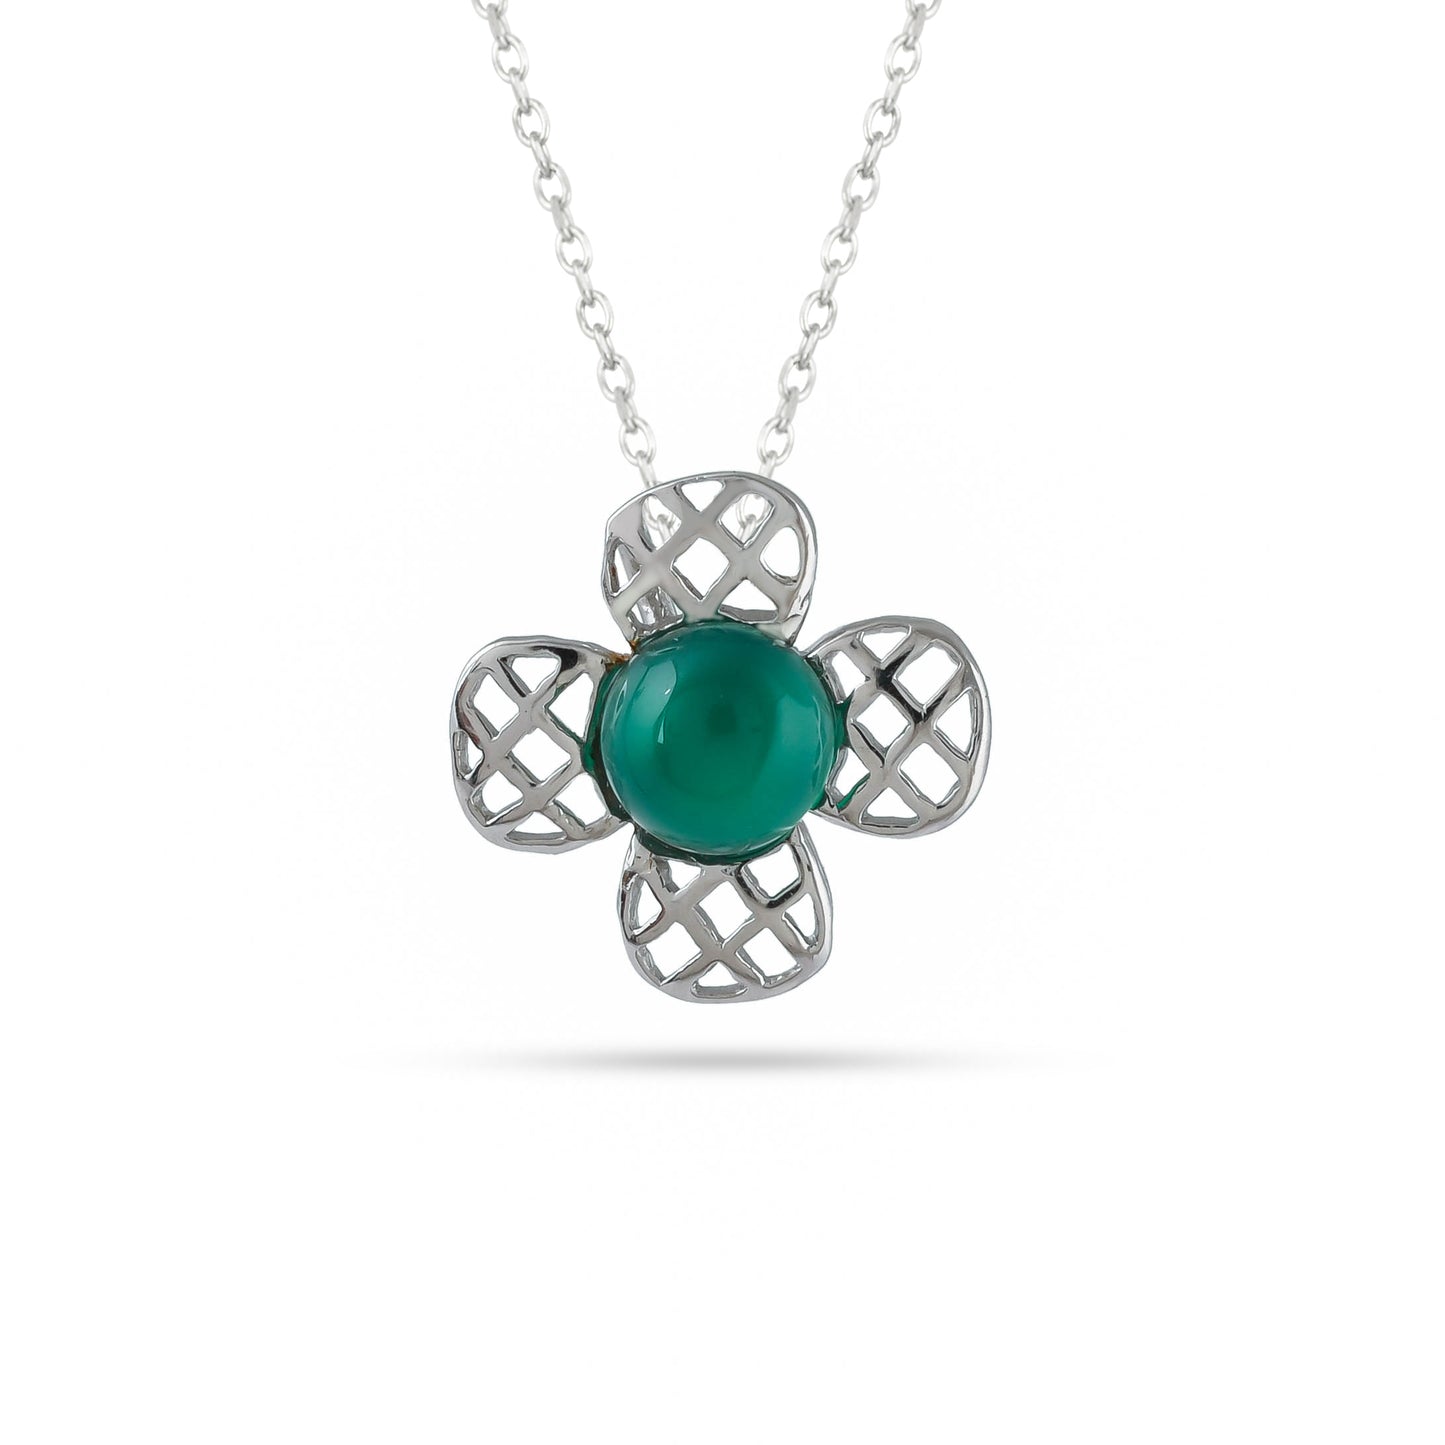 Green Cz Bloom Silver Necklace - From Purl Purl